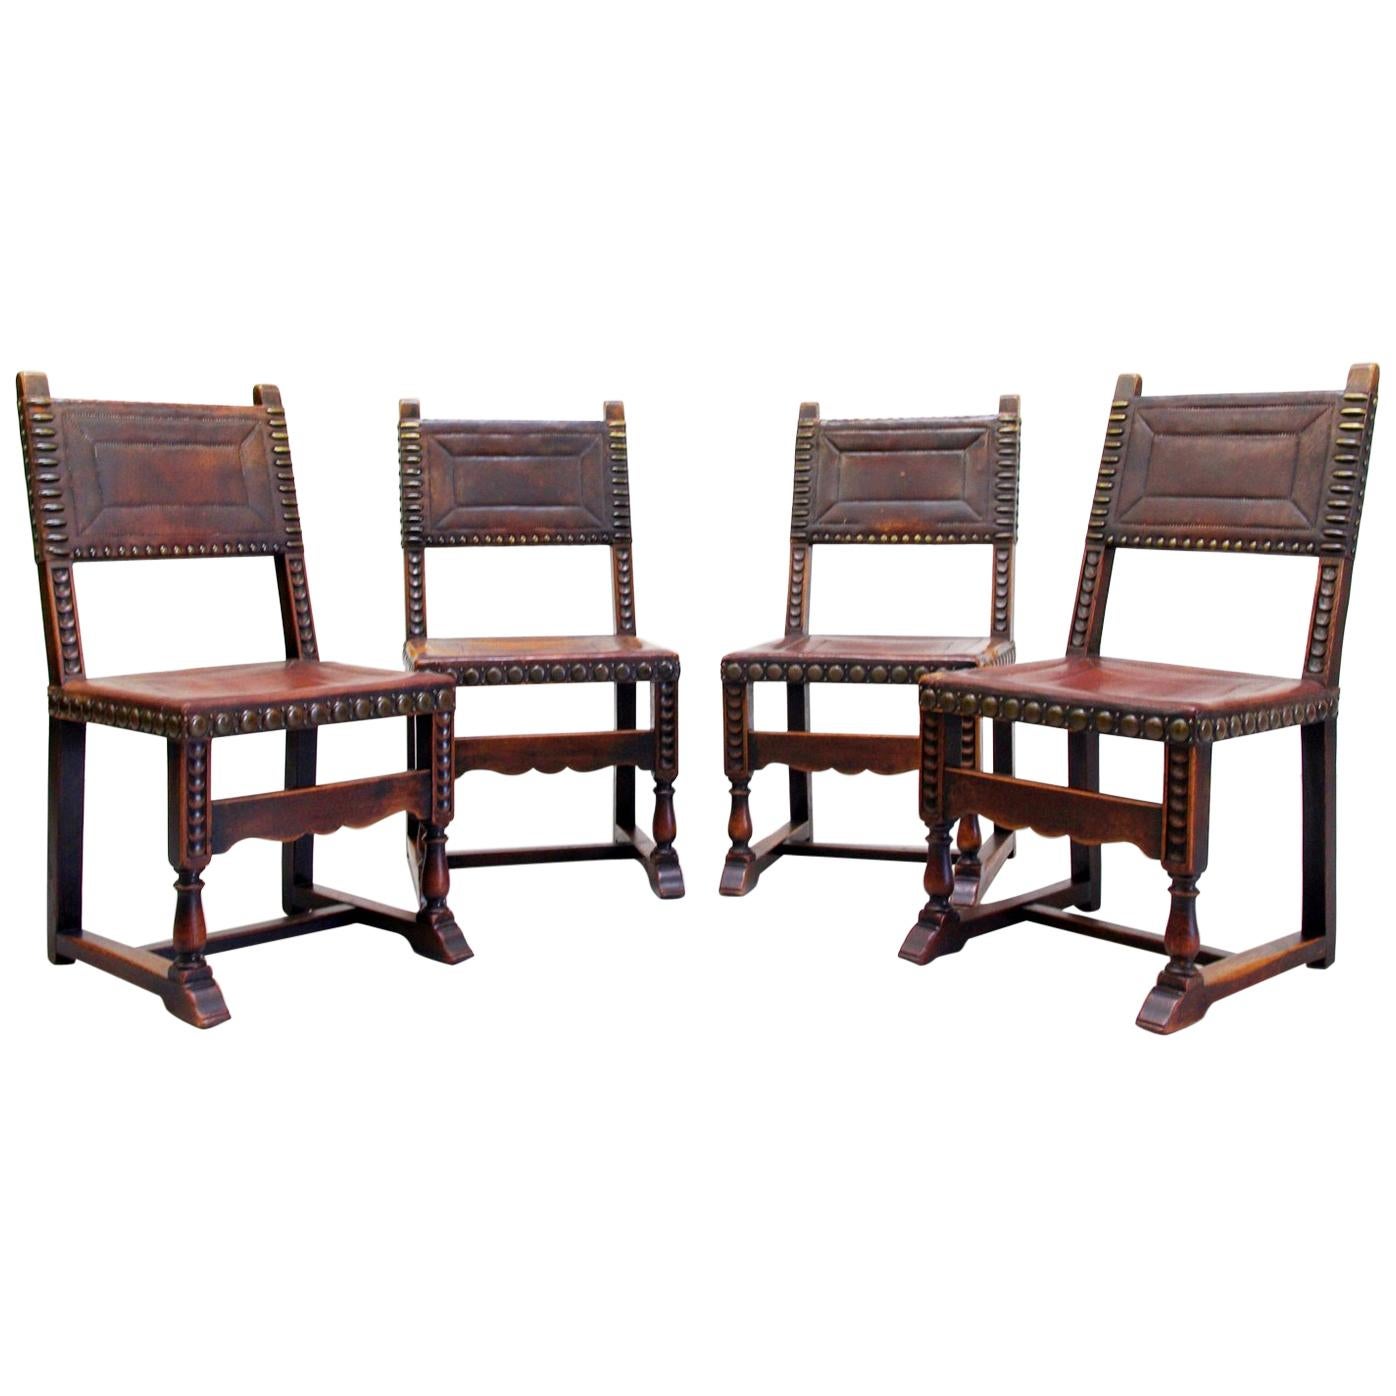 Four Monastic Chairs Antique Armchair Leather Vintage Chairs Rivets Old Span For Sale